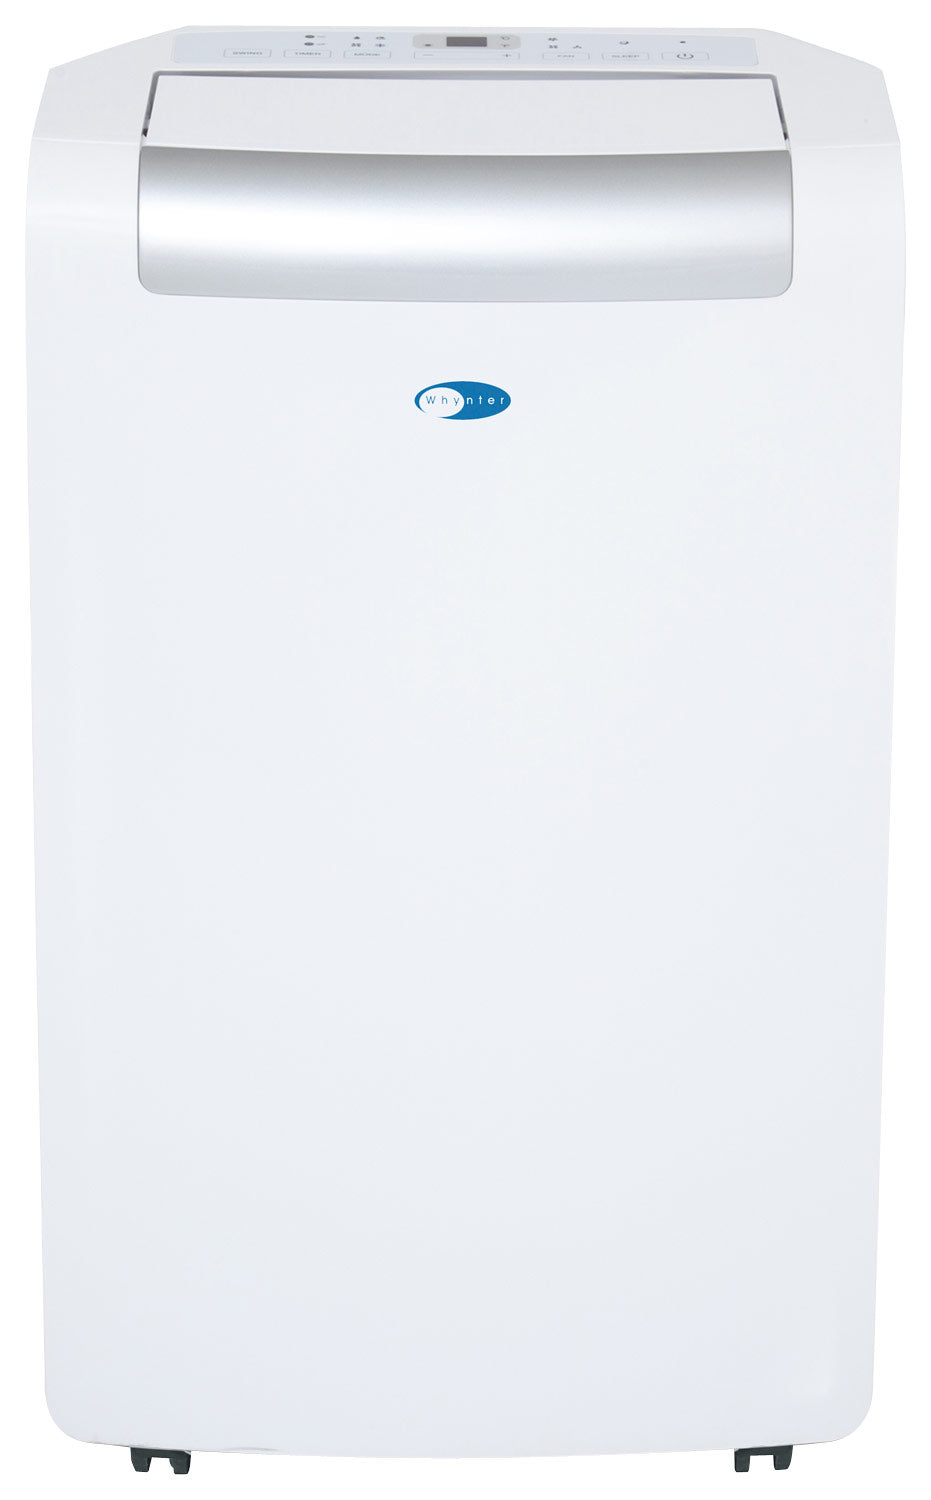 Whynter - 500 Sq. Ft. Portable Air Conditioner - Frost White_0